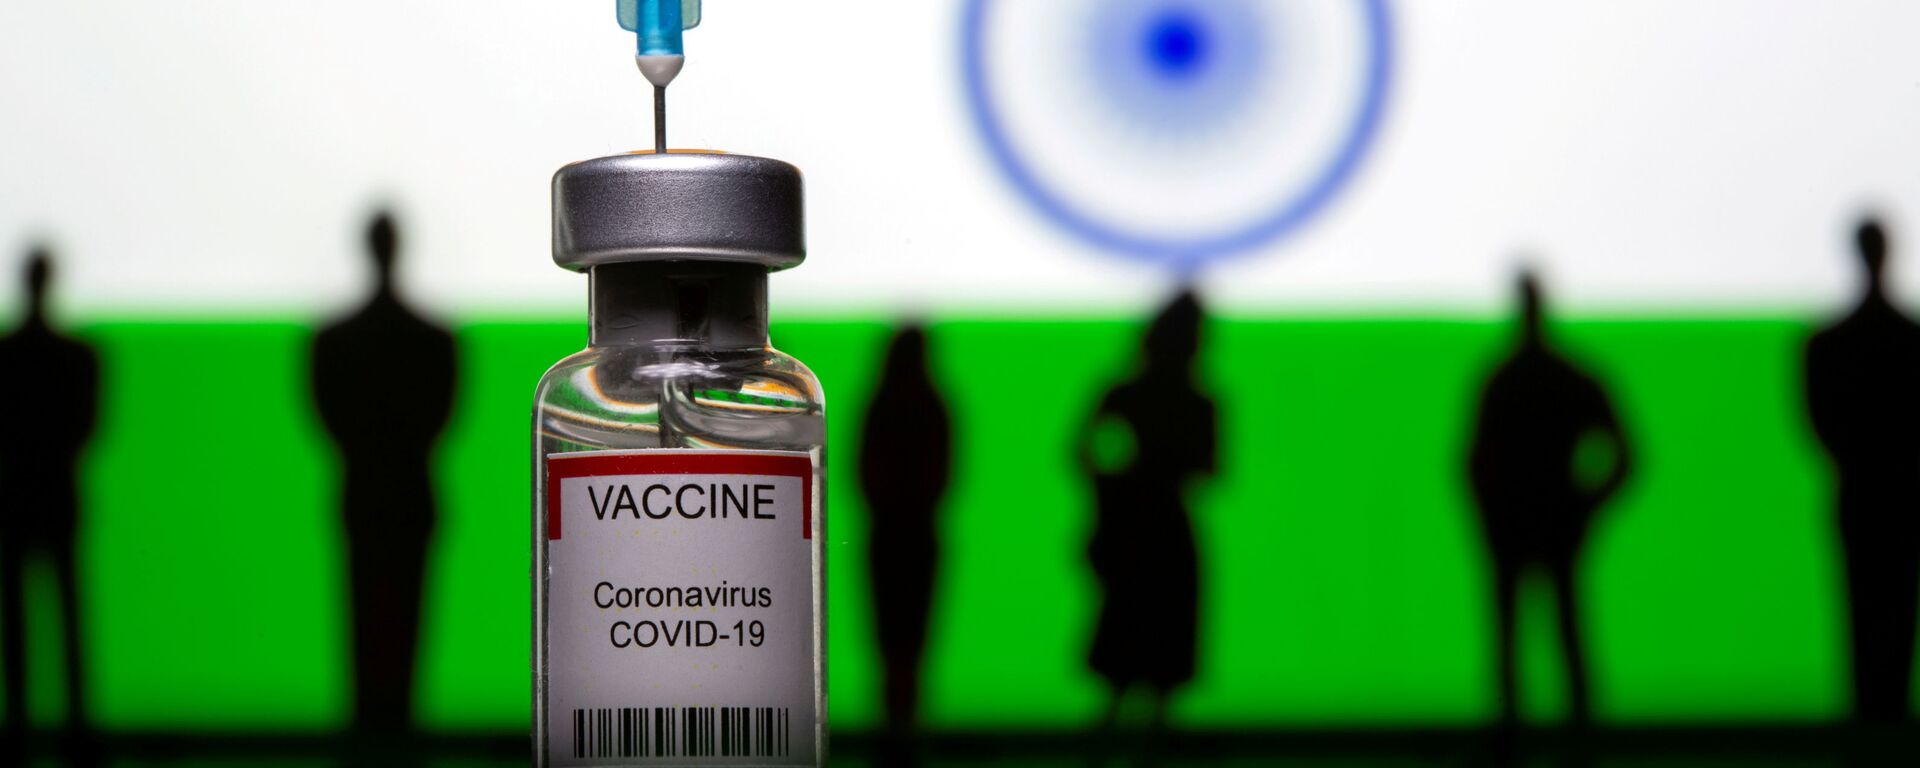 3D-printed small toy figurines, a syringe and vial labelled coronavirus disease (COVID-19) vaccine are seen in front of India flag - Sputnik International, 1920, 10.05.2021